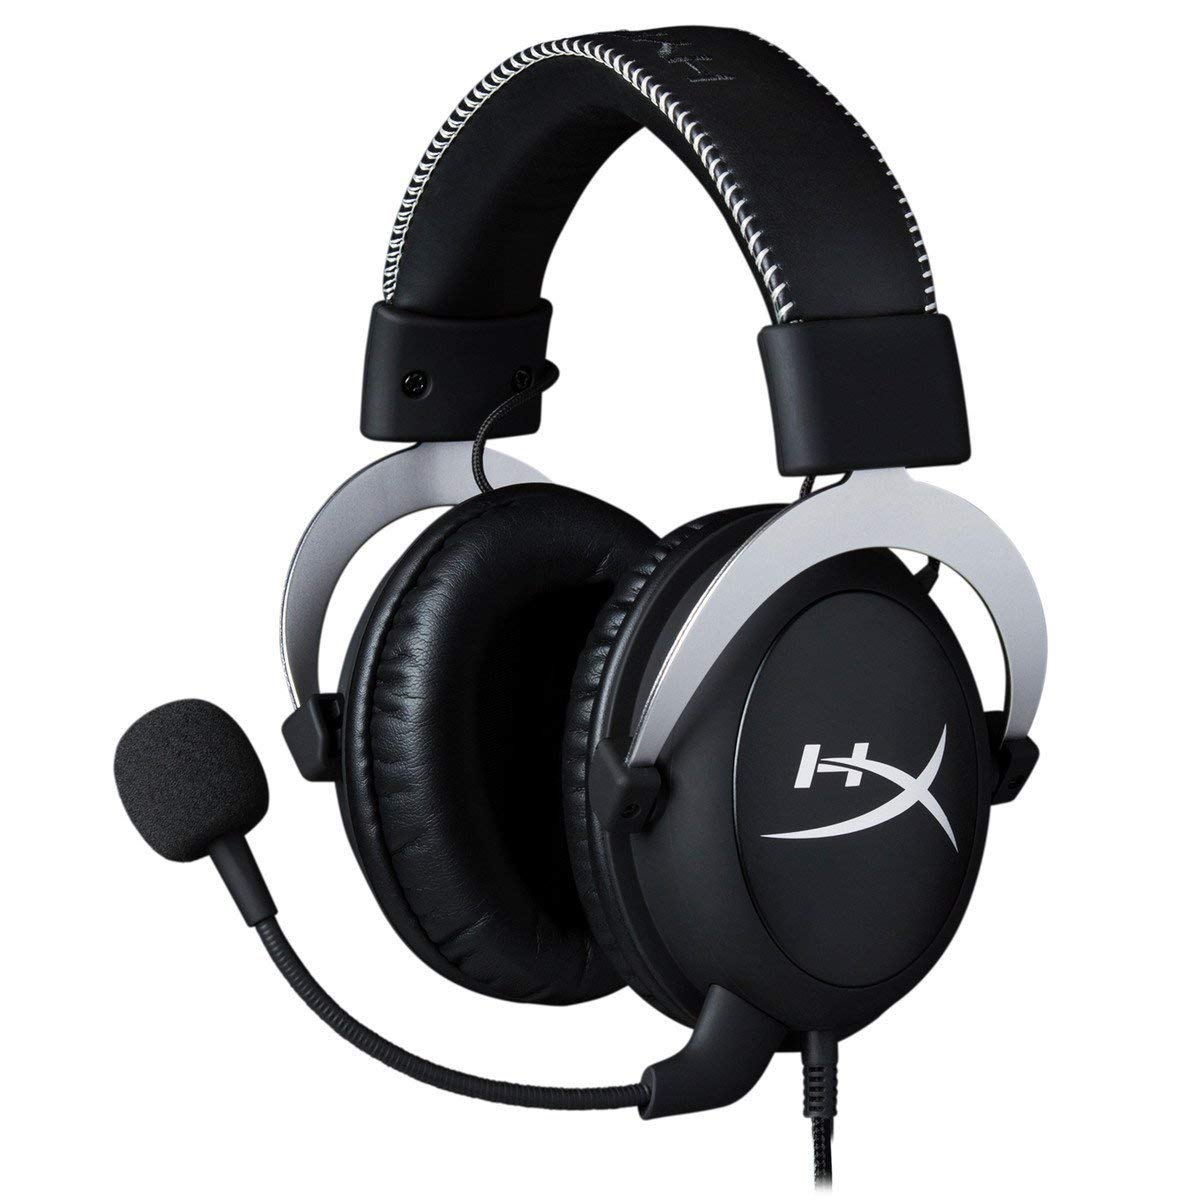 HyperX Launches Official Xbox licensed Gaming Headset in India